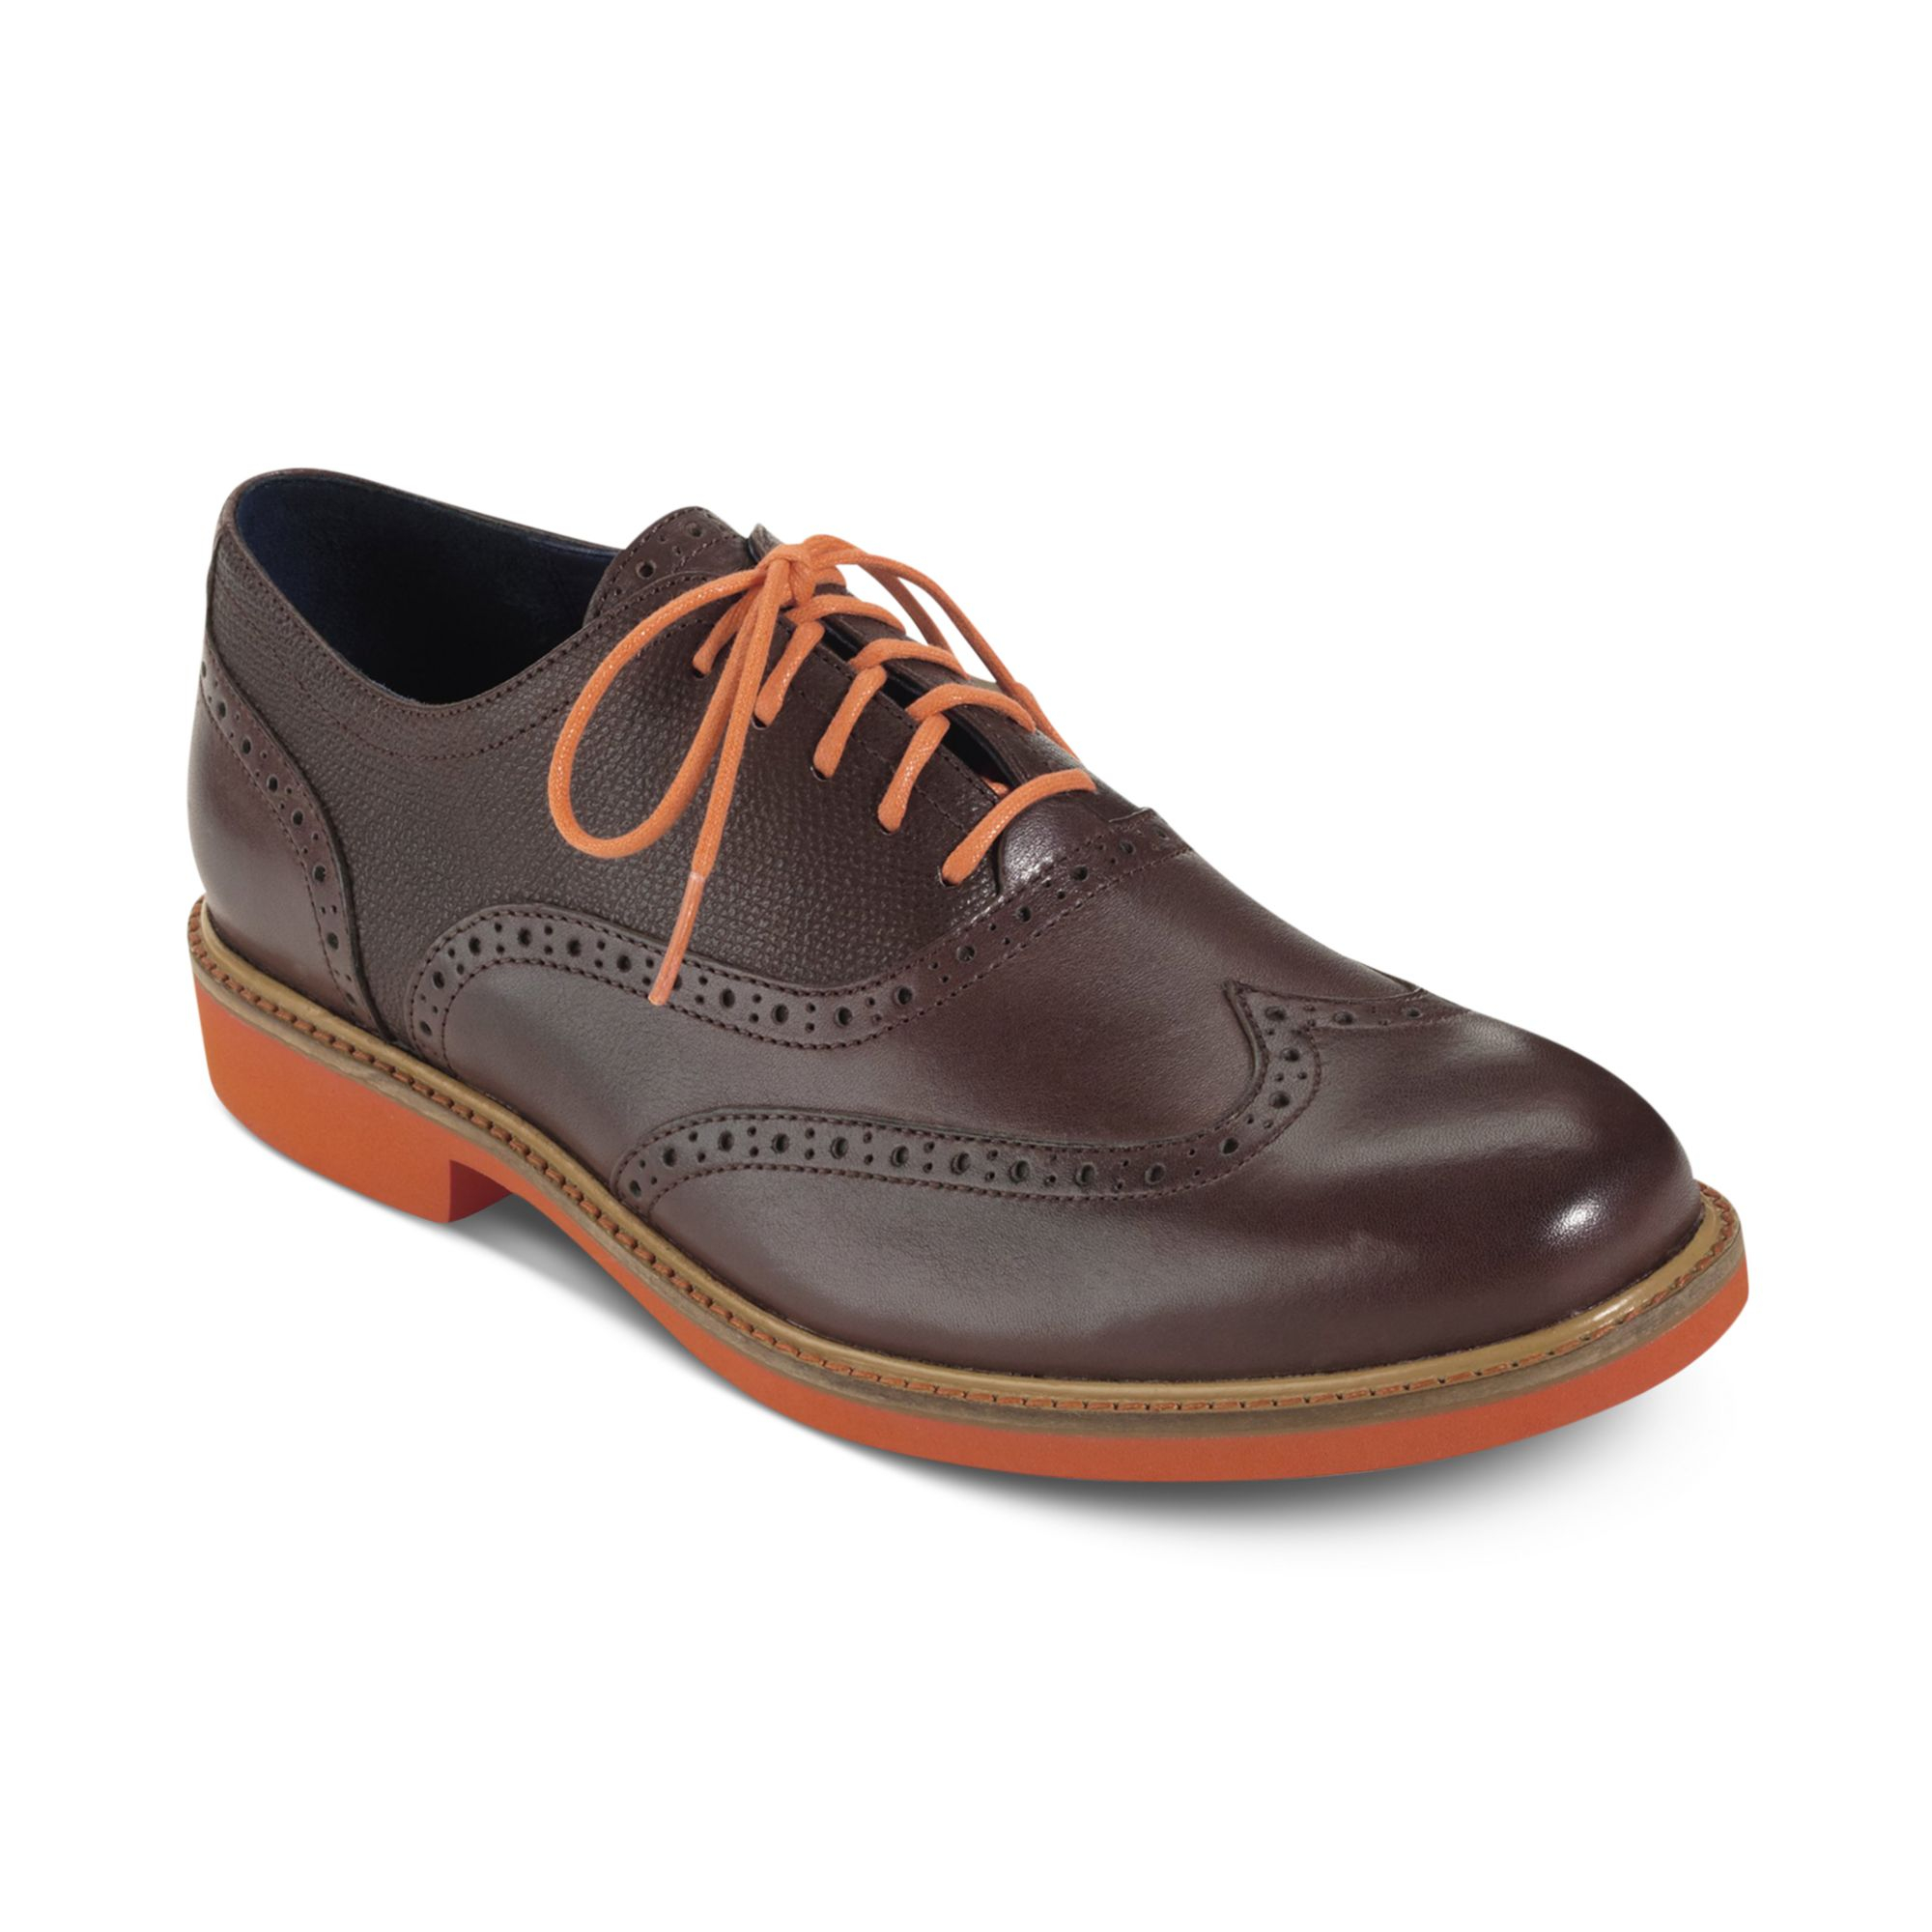 Lyst - Cole haan Great Jones Wing-tip Lace Shoes in Brown for Men